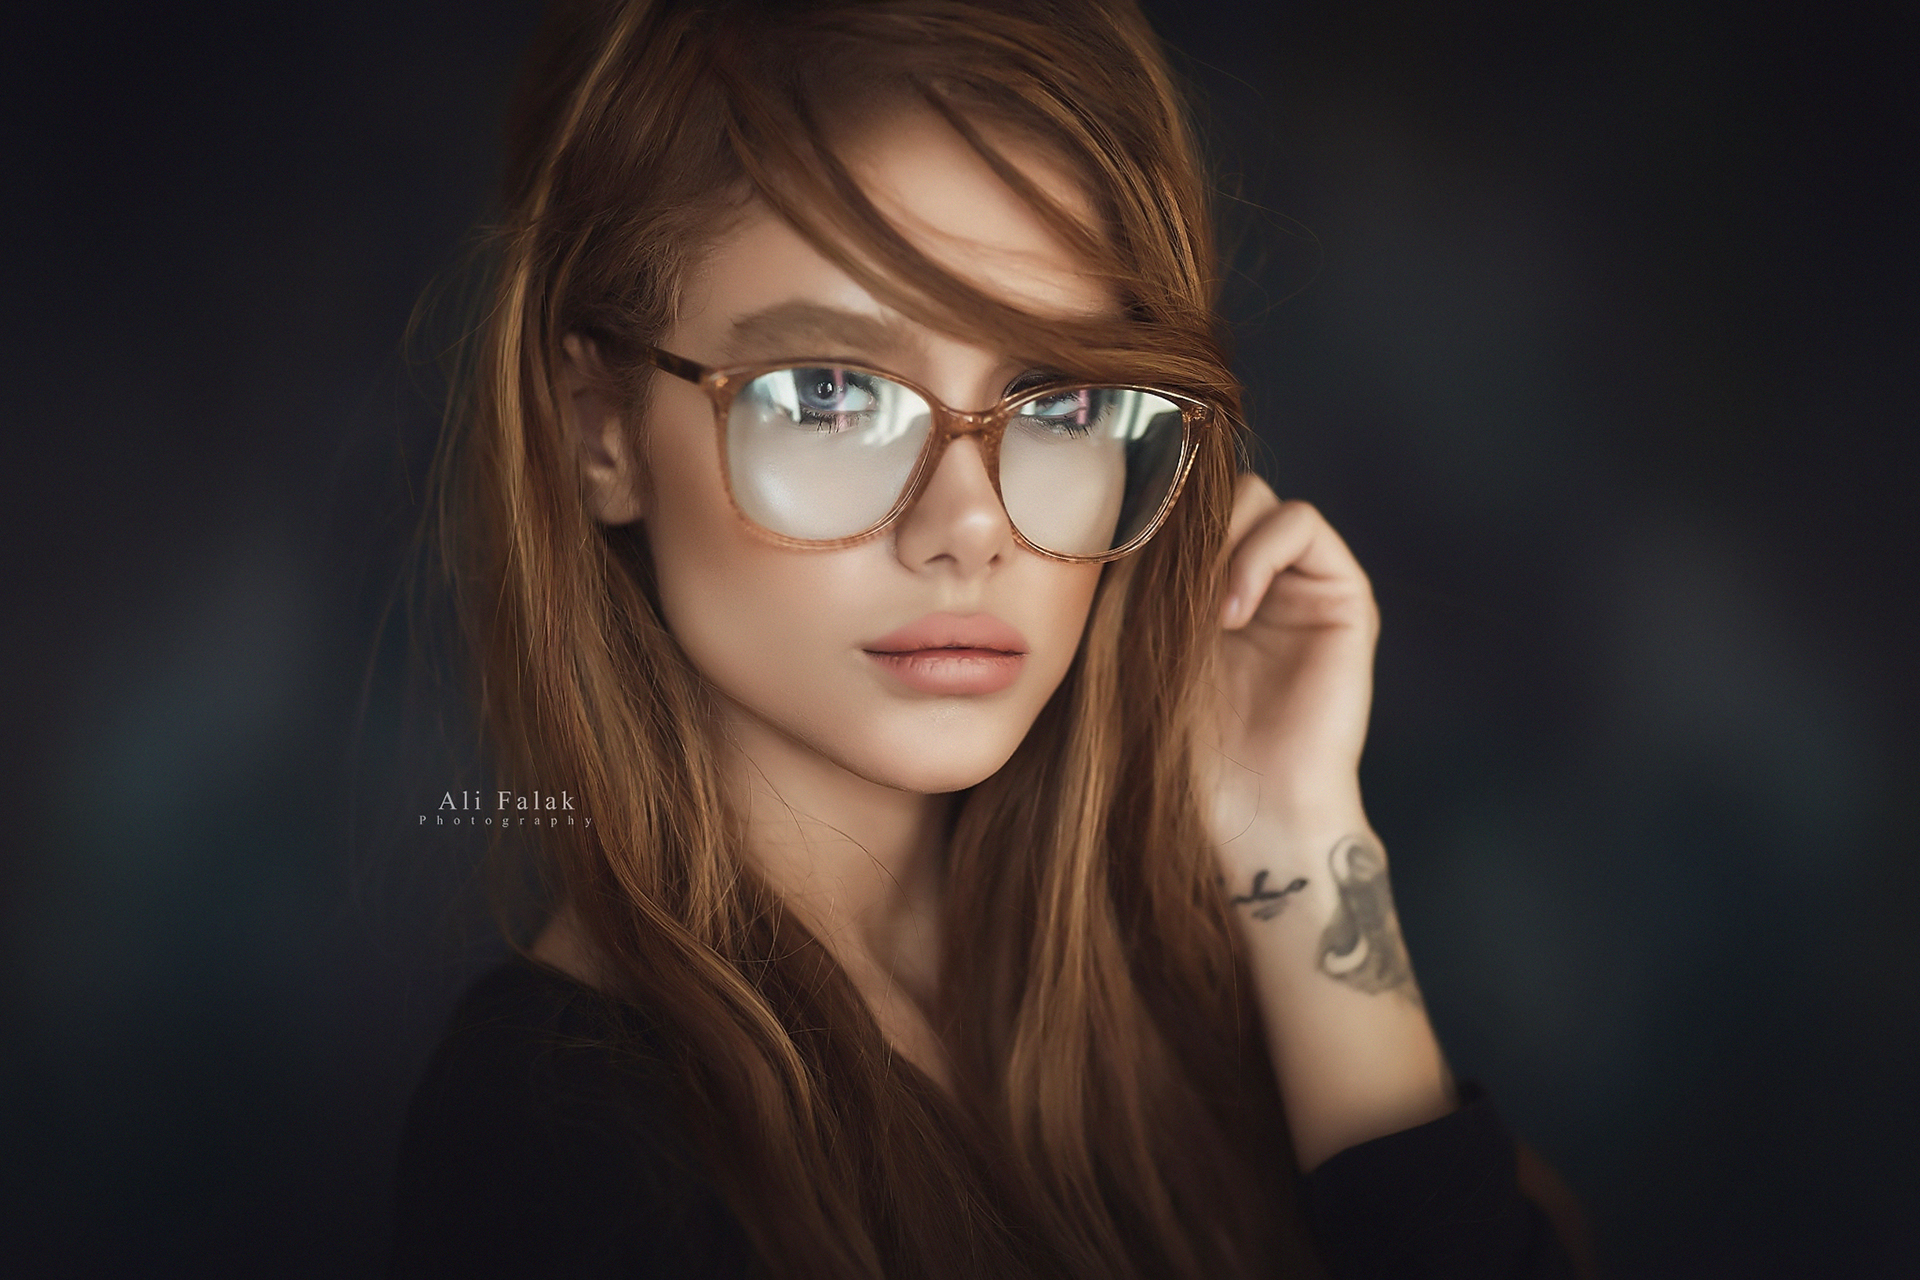 People 1920x1280 women face portrait women with glasses tattoo Ali Falak touching hair watermarked